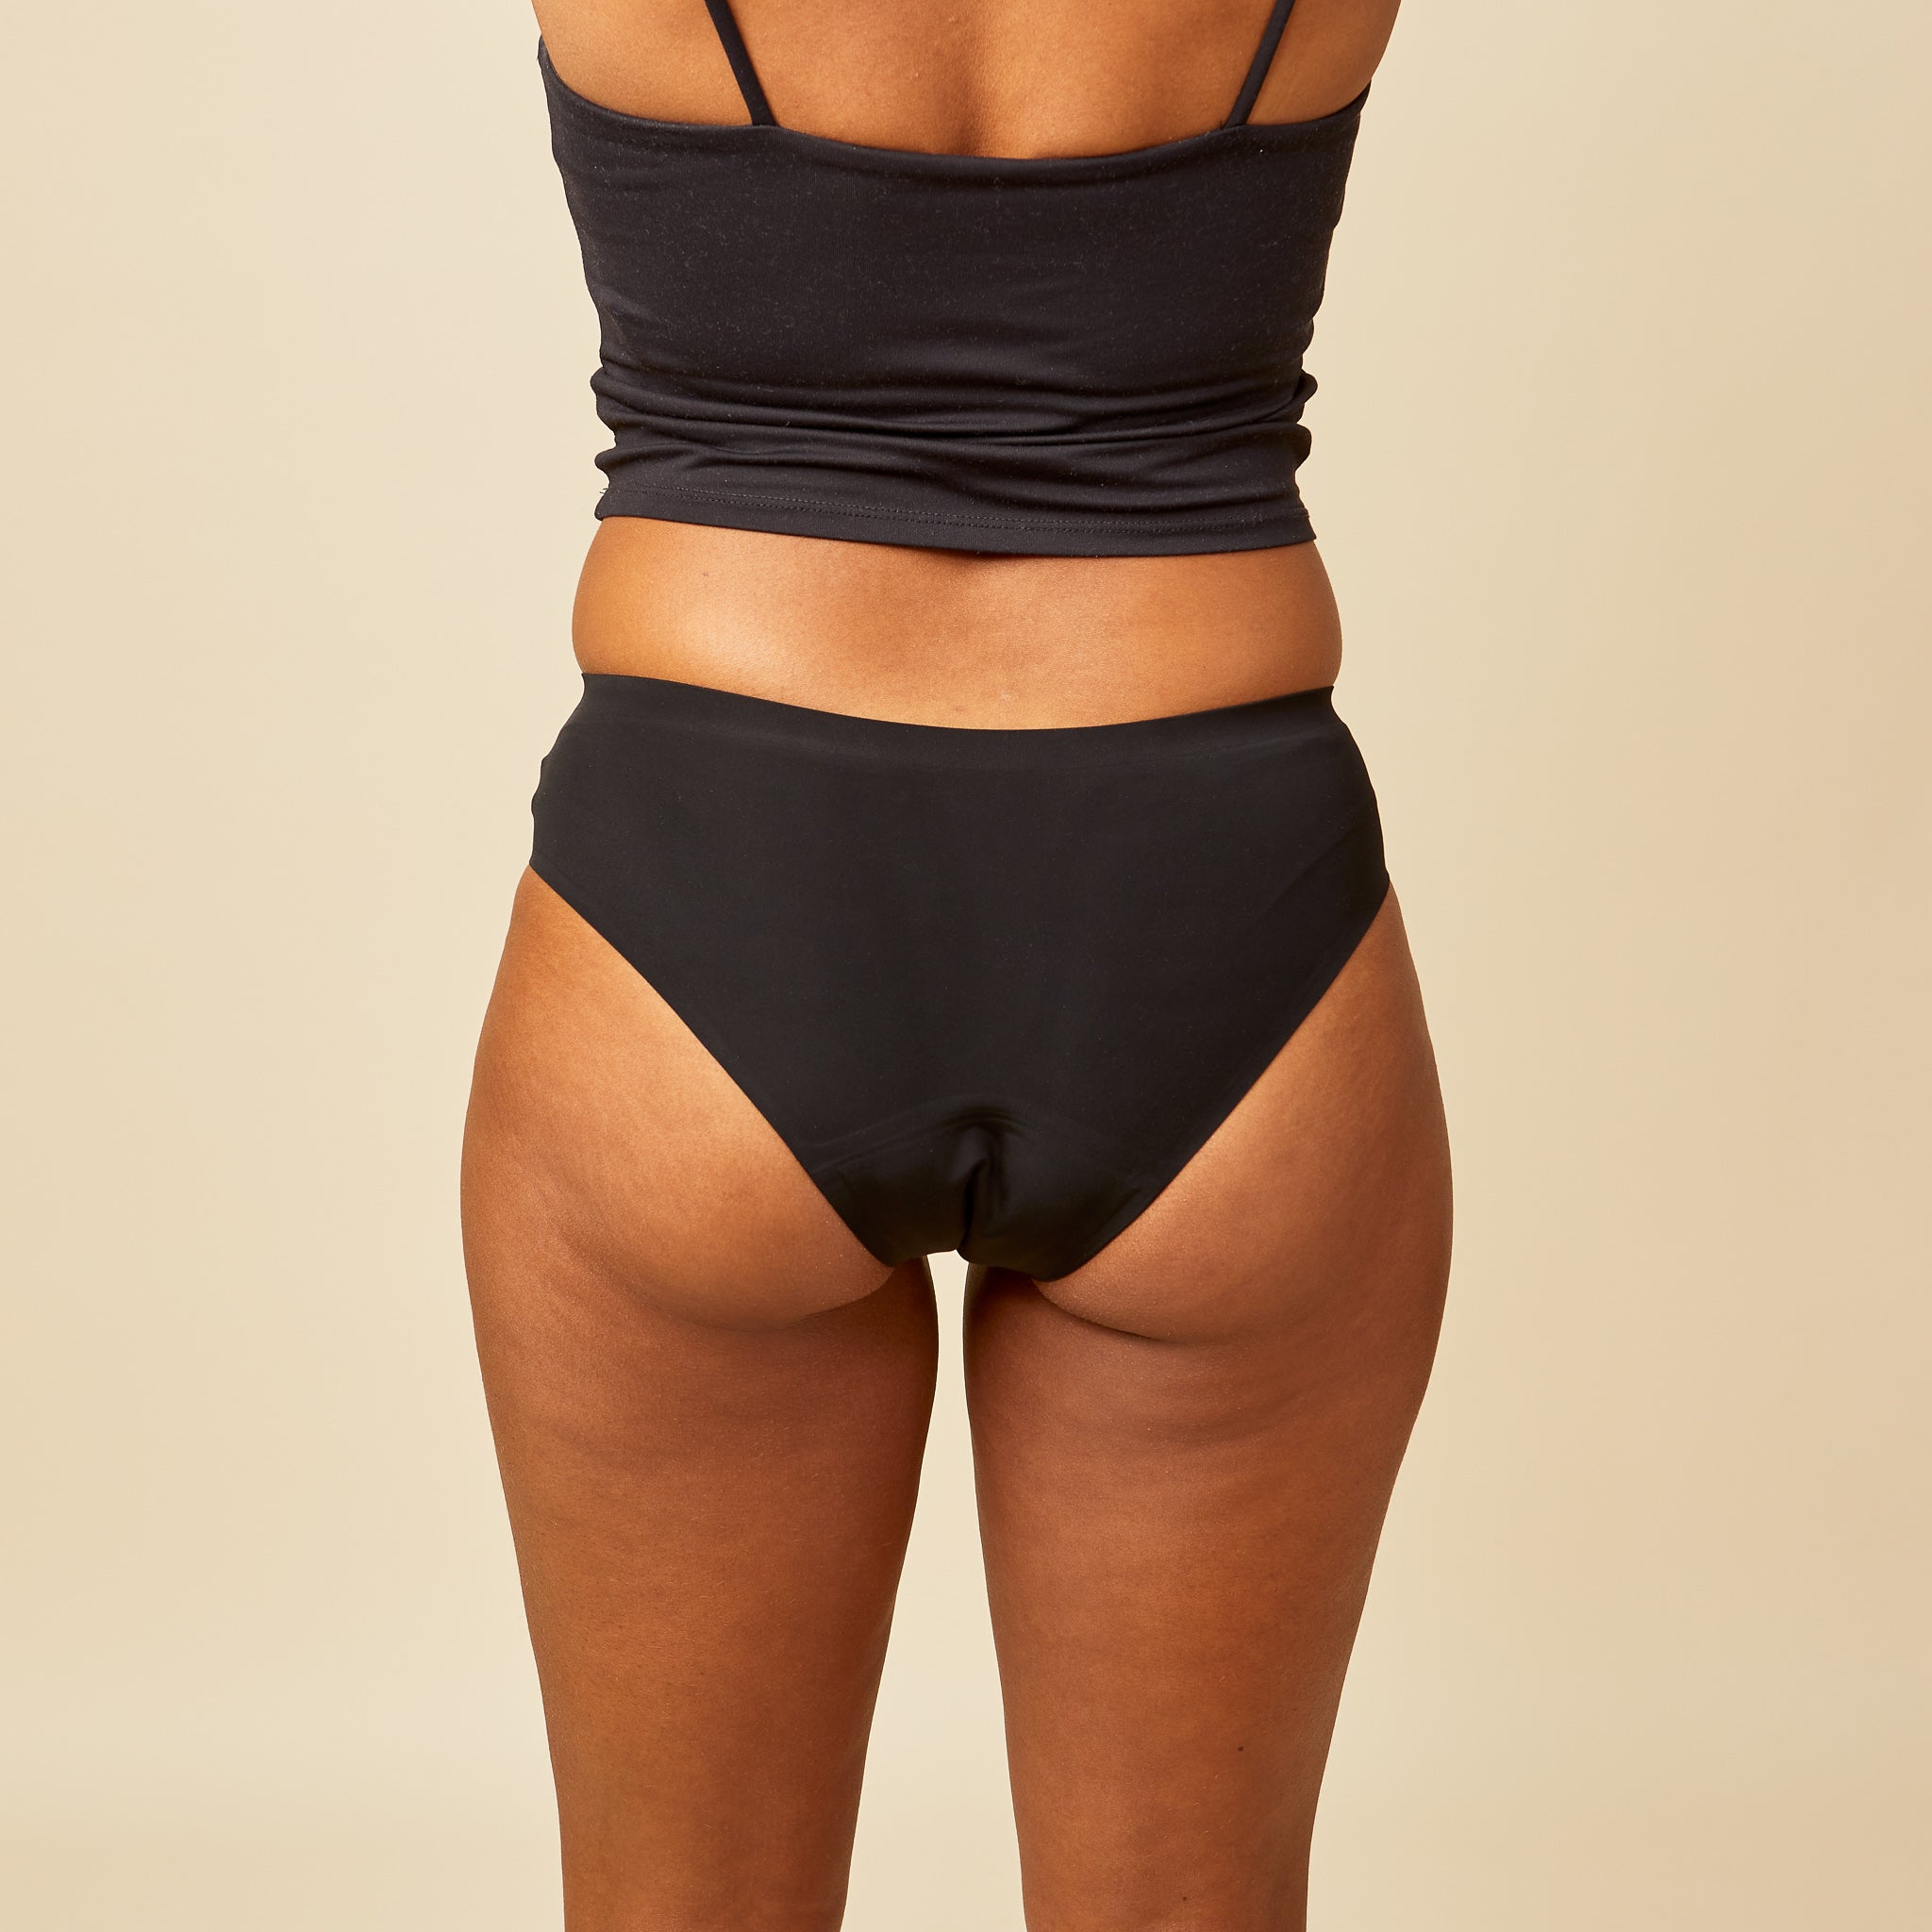 dais period underwear cheeky in black shown on a model from the back. 